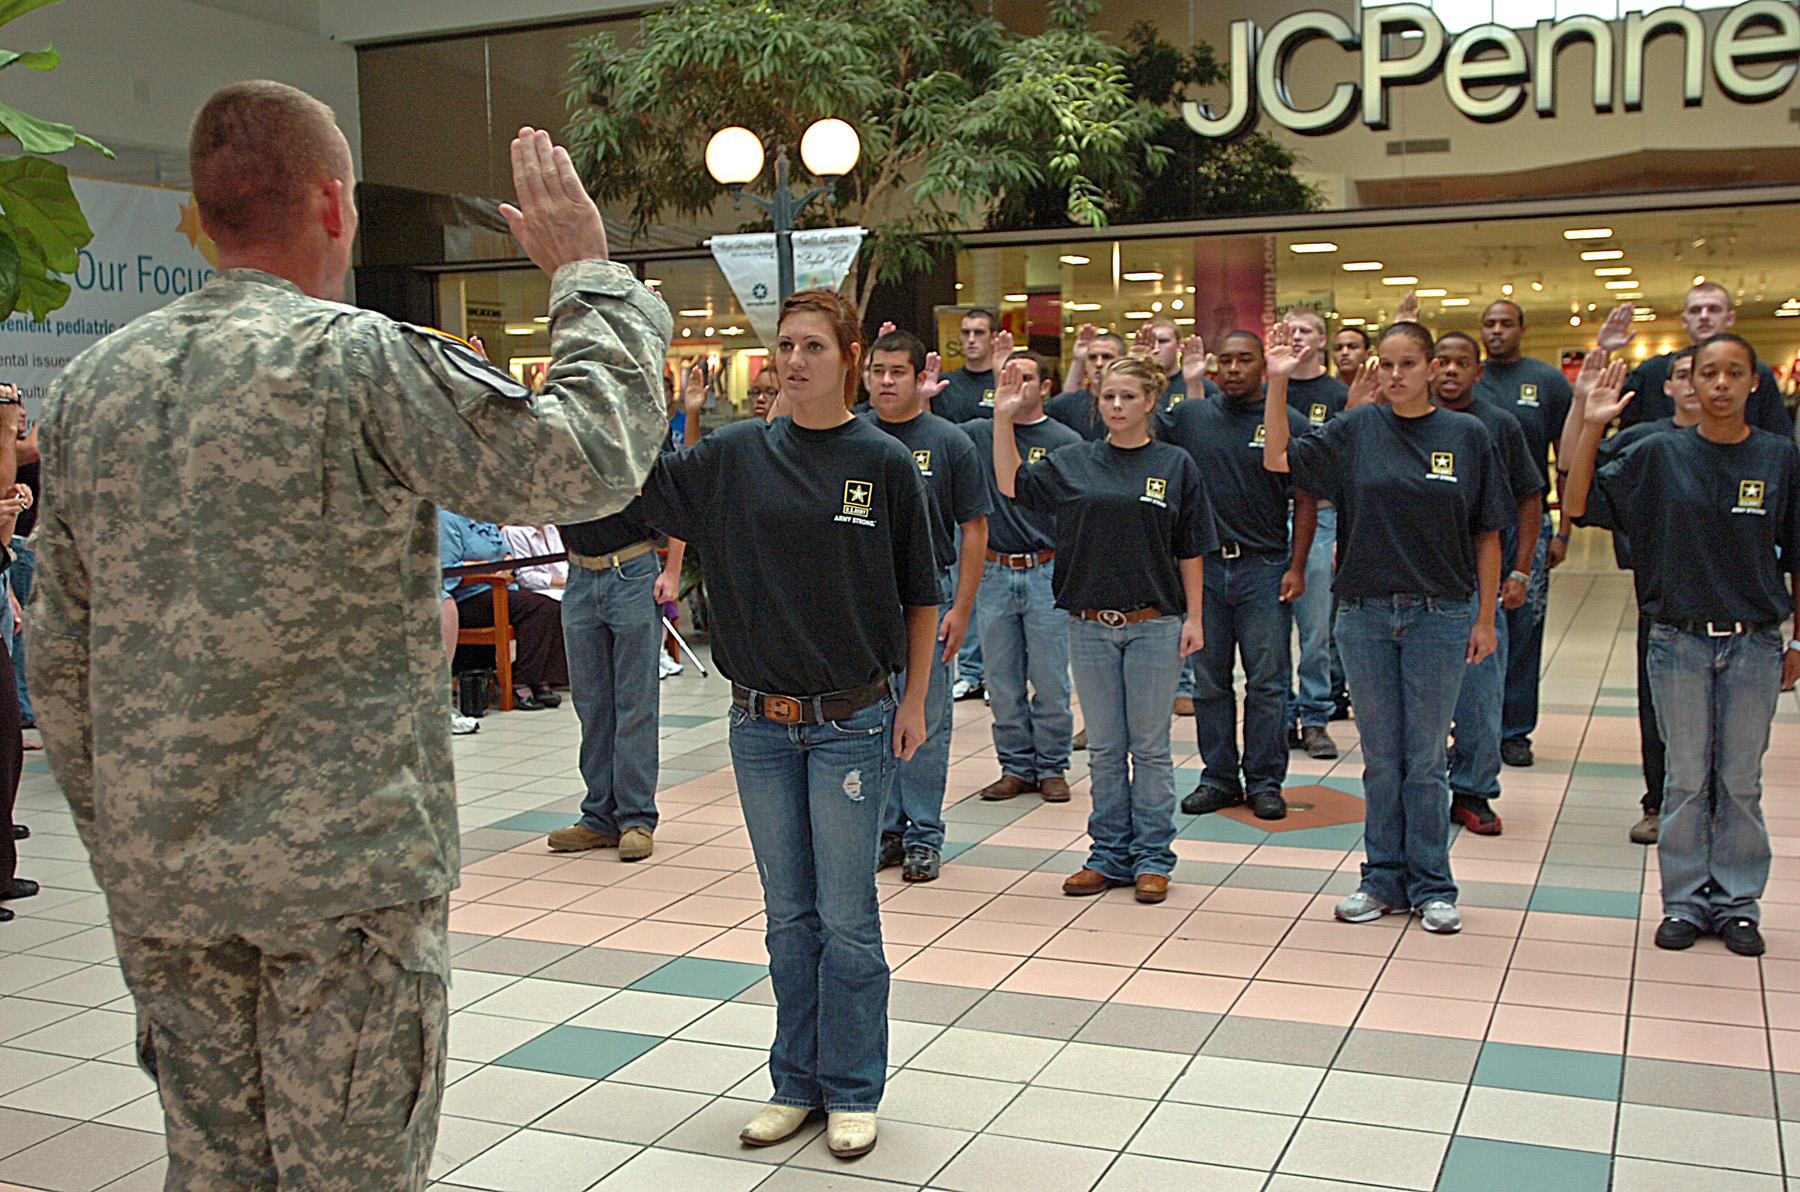 Future Soldiers raise their right hand | Article | The United States ...